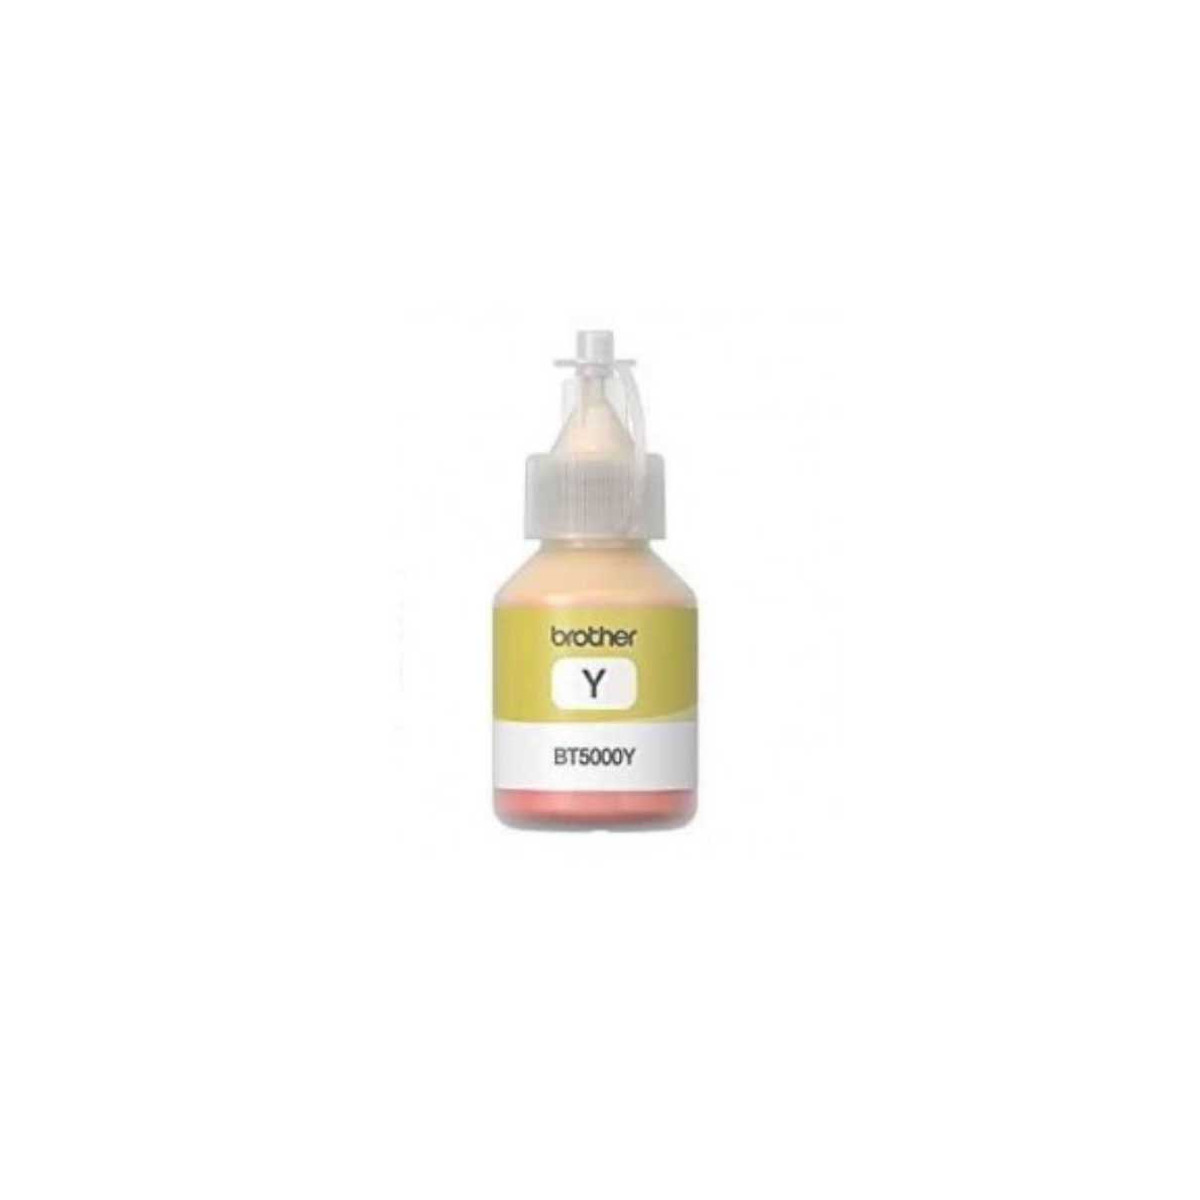 BOUTEILLE D'ENCRE ADAPTABLE BROTHER BT5000Y - 50ML - YELLOW